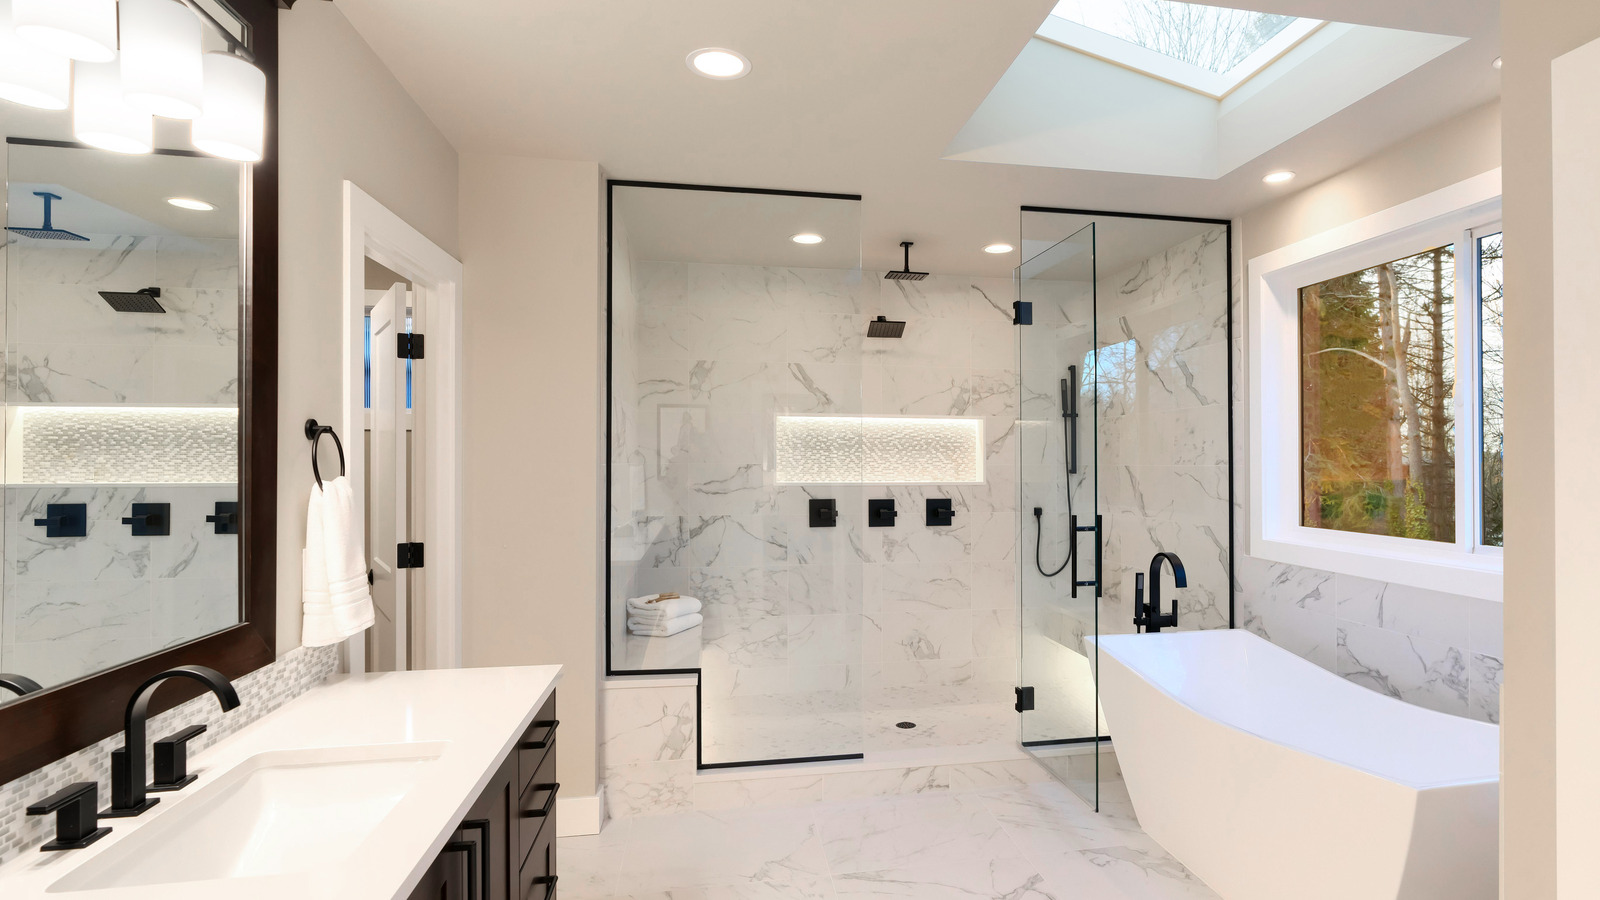 Curbless Shower Designs for a Spa Bathroom at Home